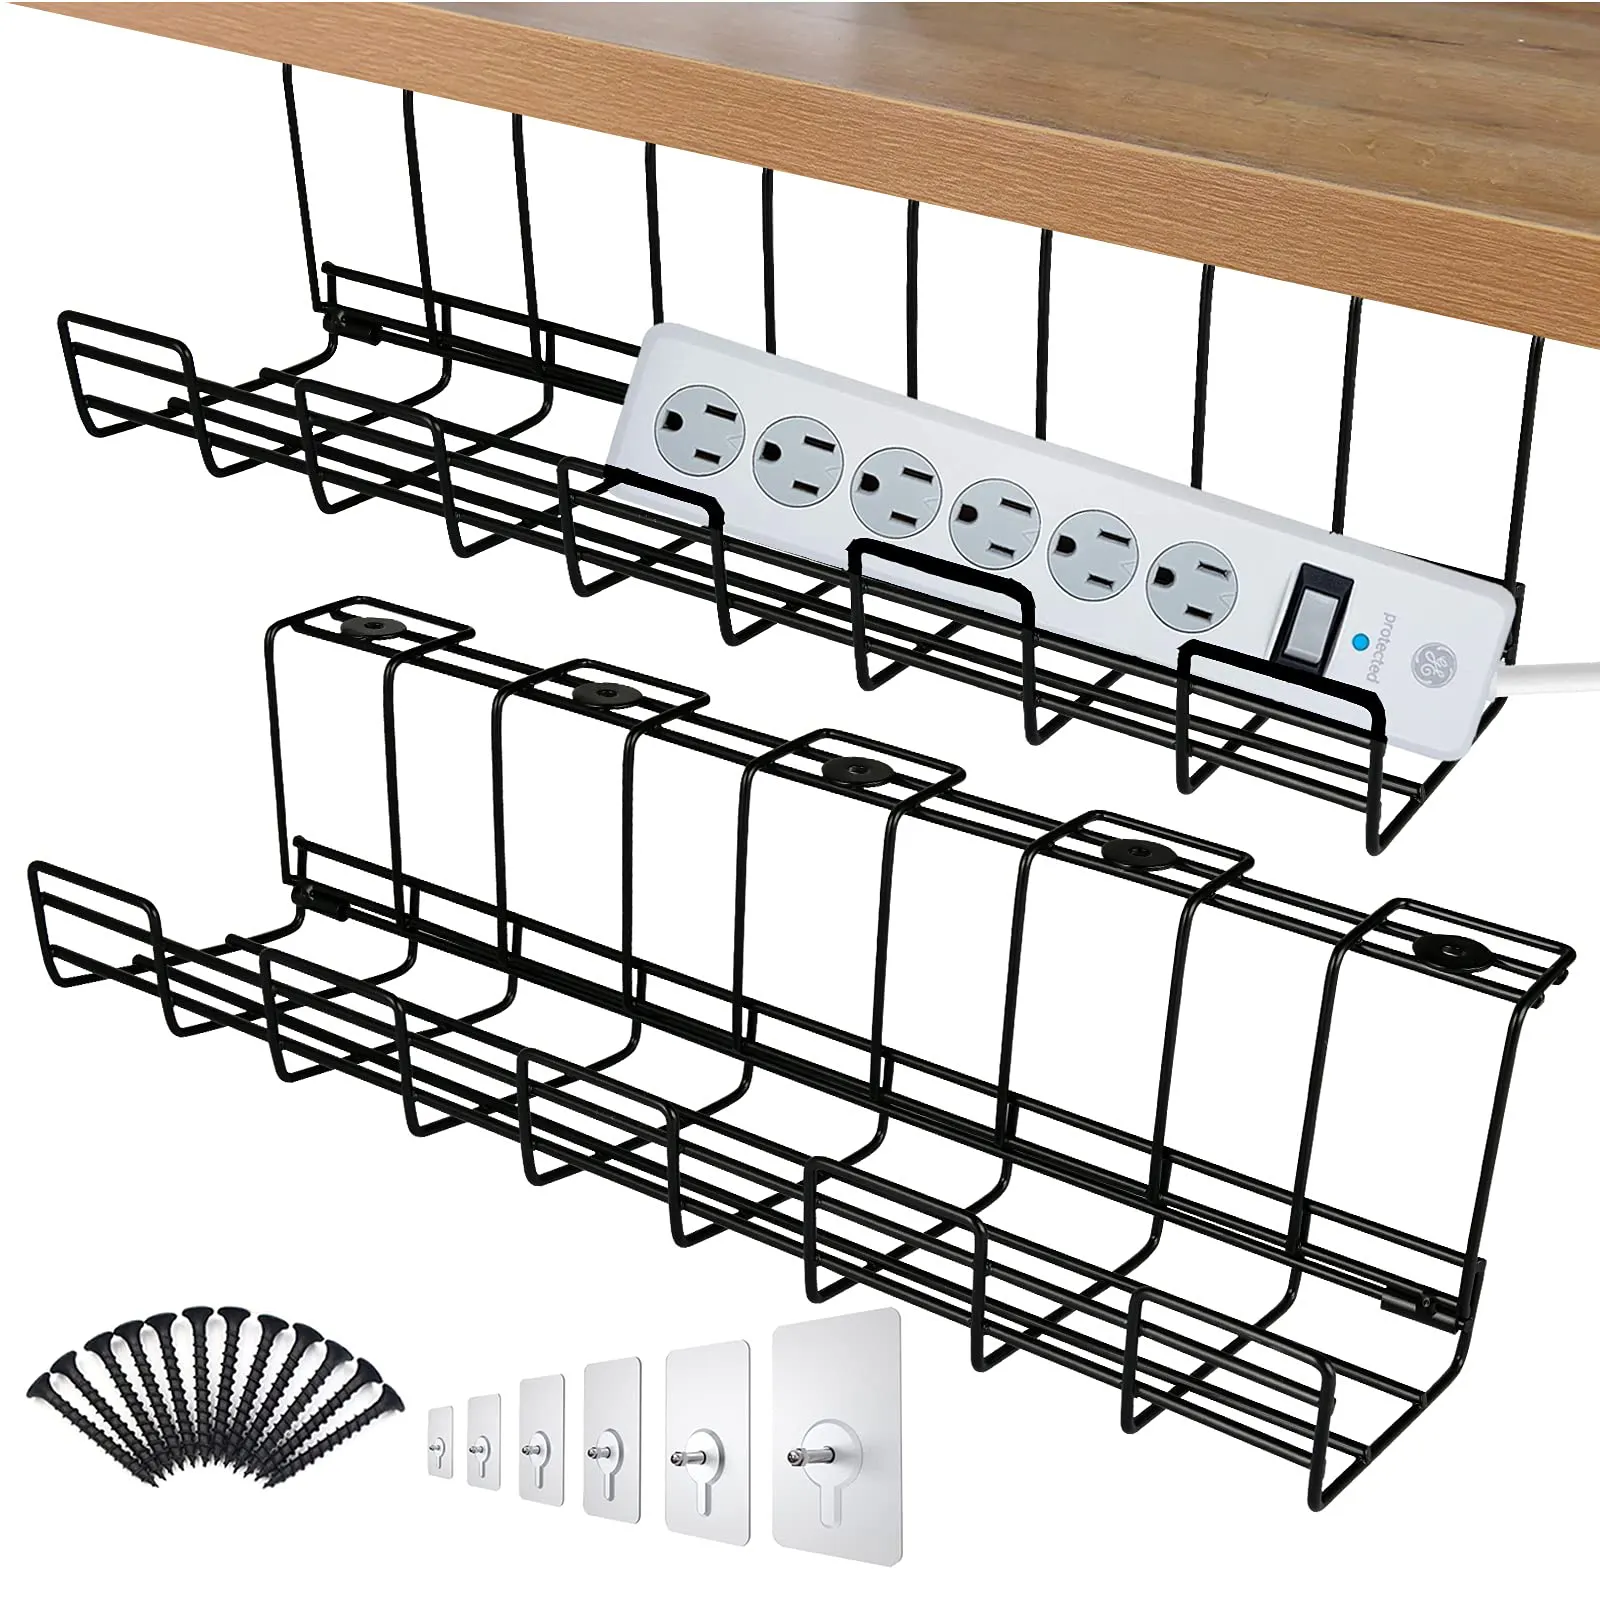 Storage Holders Folding Home Office Power Strip Cord Tray Organize Metal Under Desk Cable Management Wire Storage Holders Rack